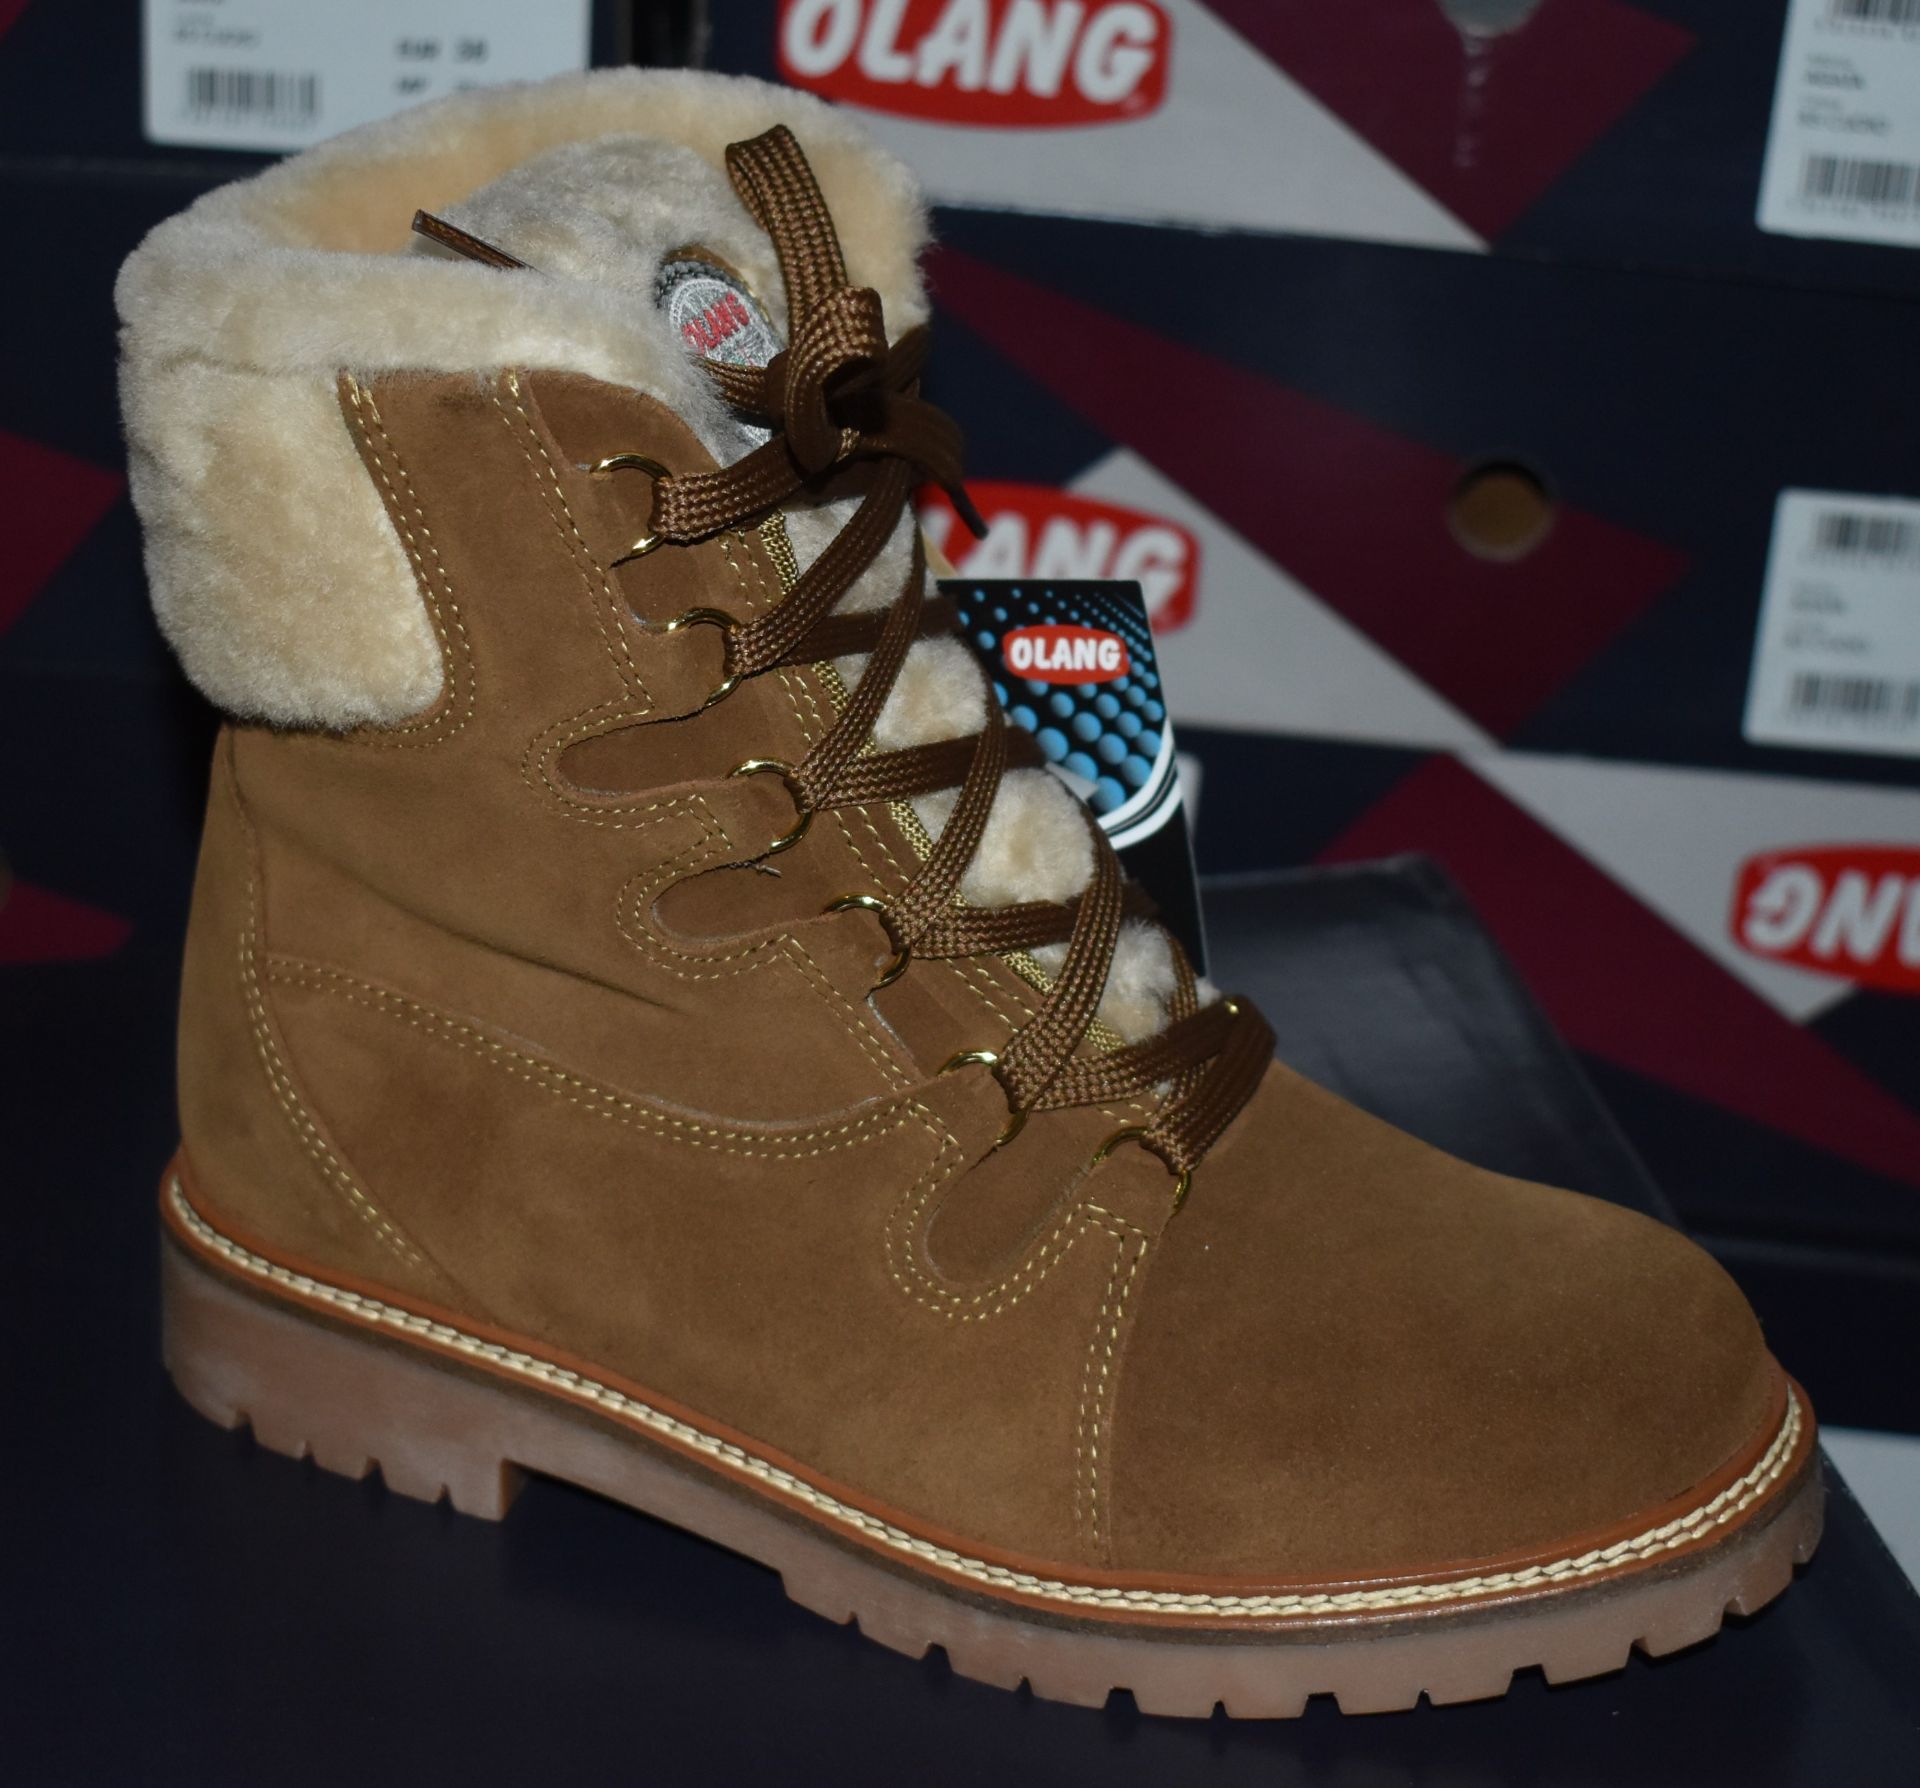 1 x Pair of Designer Olang Meribel 85 CUOIO Women's Winter Boots - Euro Size 36 - Brand New Boxed - Image 4 of 8